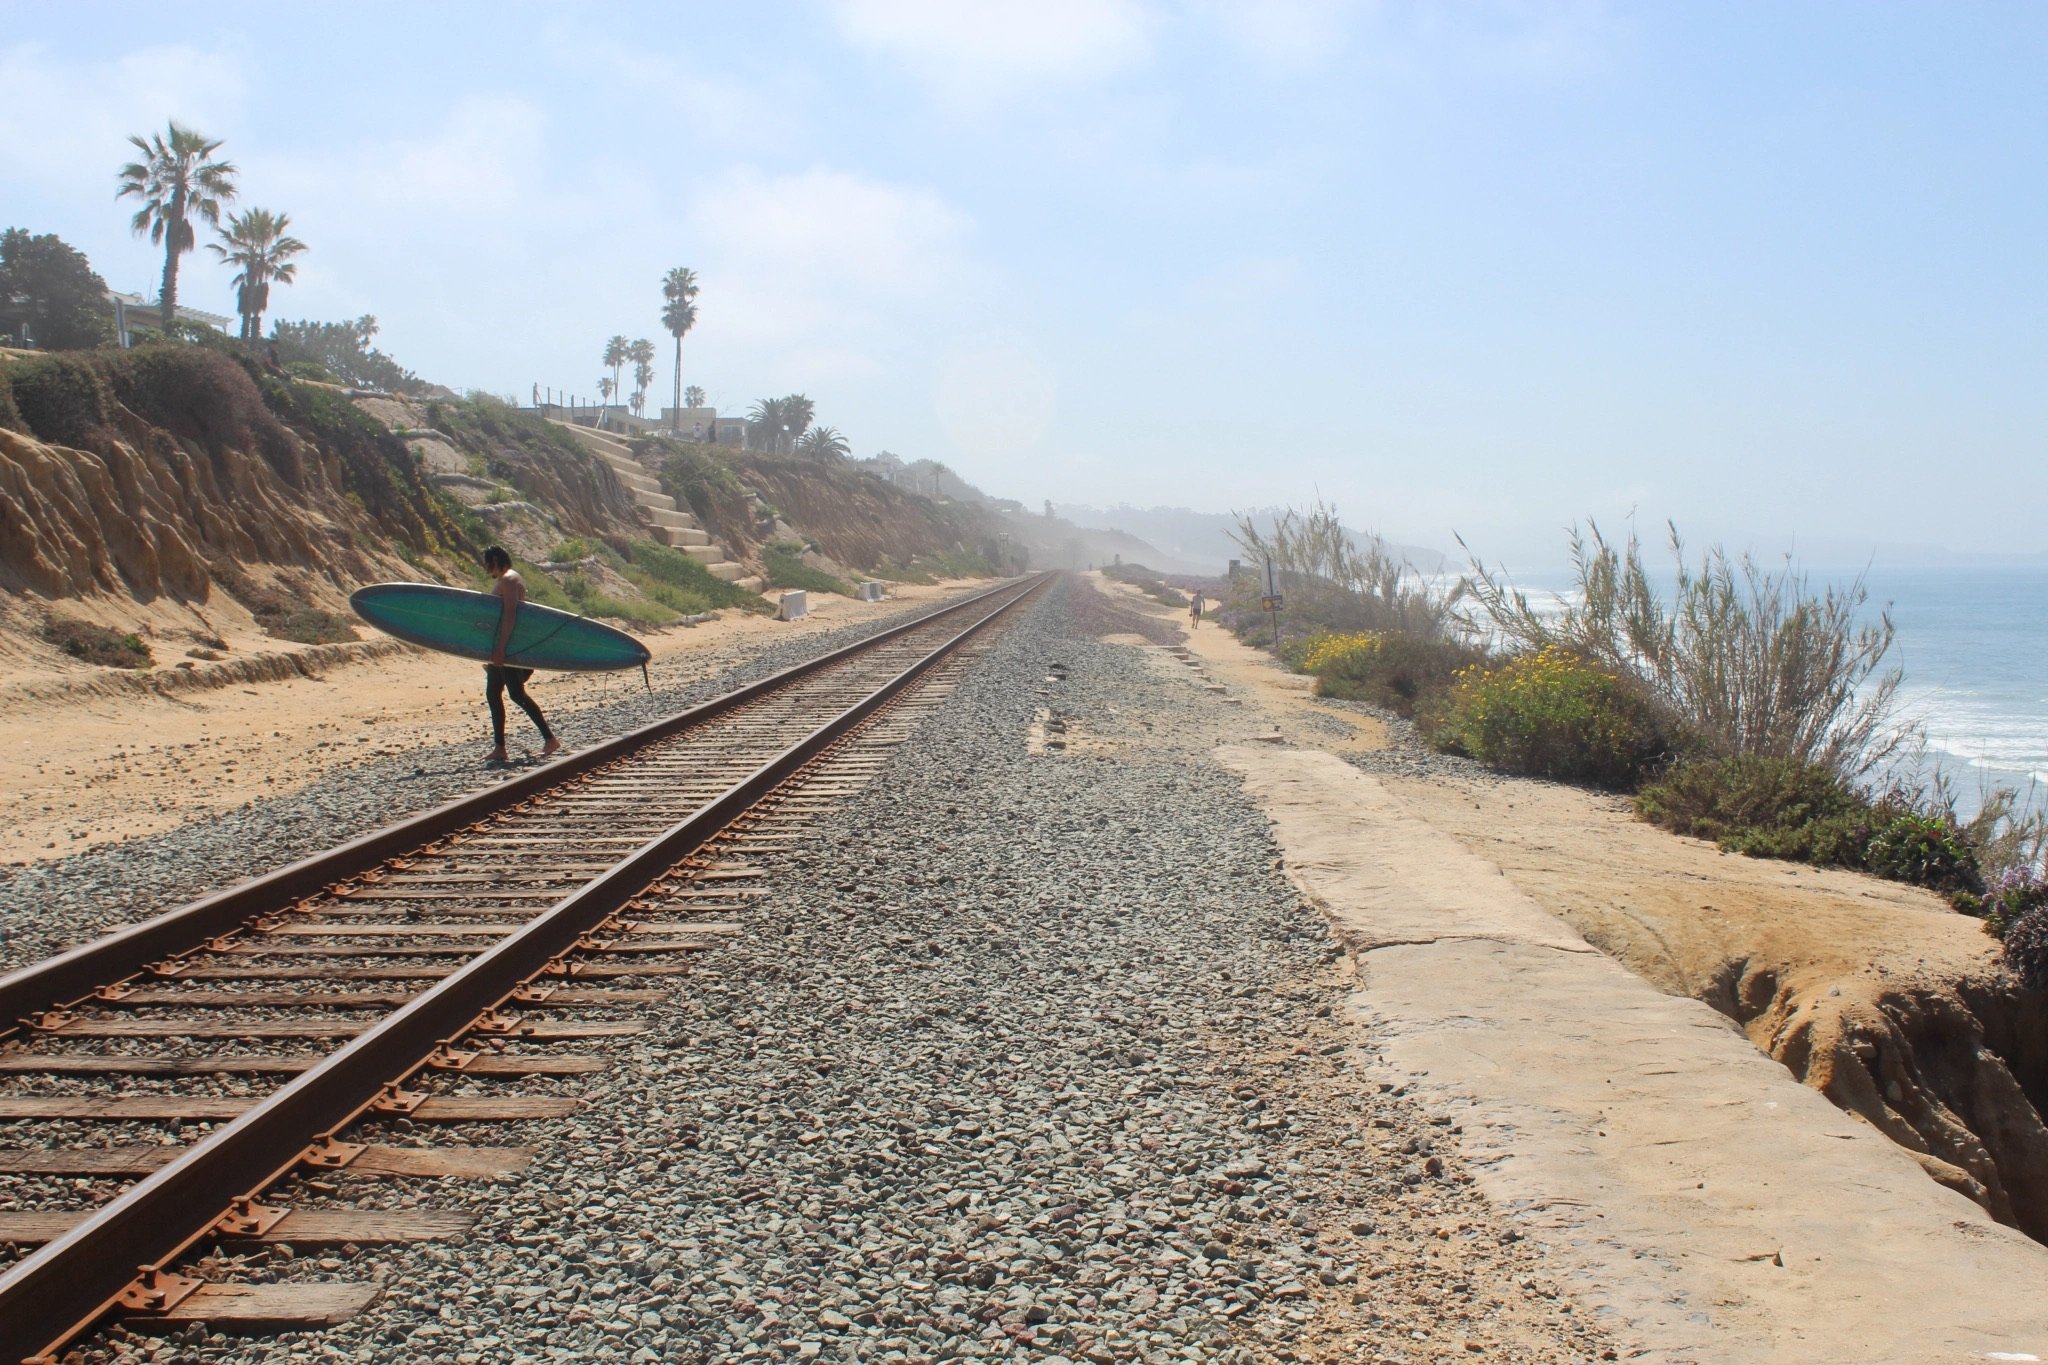 A surfer illegally crosses the train tracks to access the beach via a path down the bluff